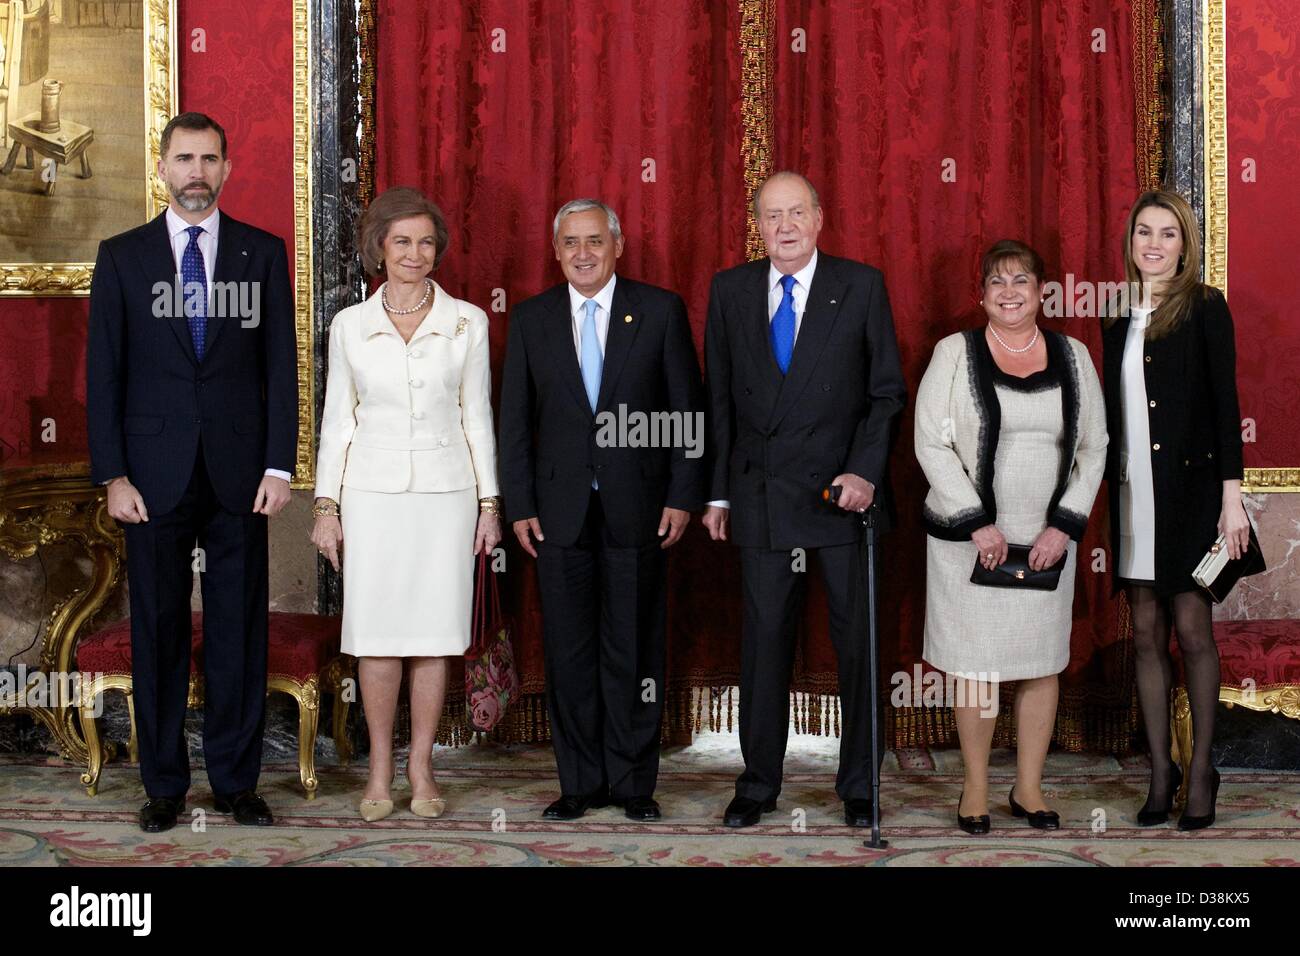 Feb. 13, 2013 - Madrid, Spain - King Juan Carlos of Spain, Queen Sofia of Spain, Prince Felipe of Spain and Princess Letizia attend the Lunch in honor of Otto Fernando Perez Molinathe President of the Republic of Guatemala and Ms. Rosa Leal at Royal Palace in Madrid (Credit Image: © Jack Abuin/ZUMAPRESS.com) Stock Photo